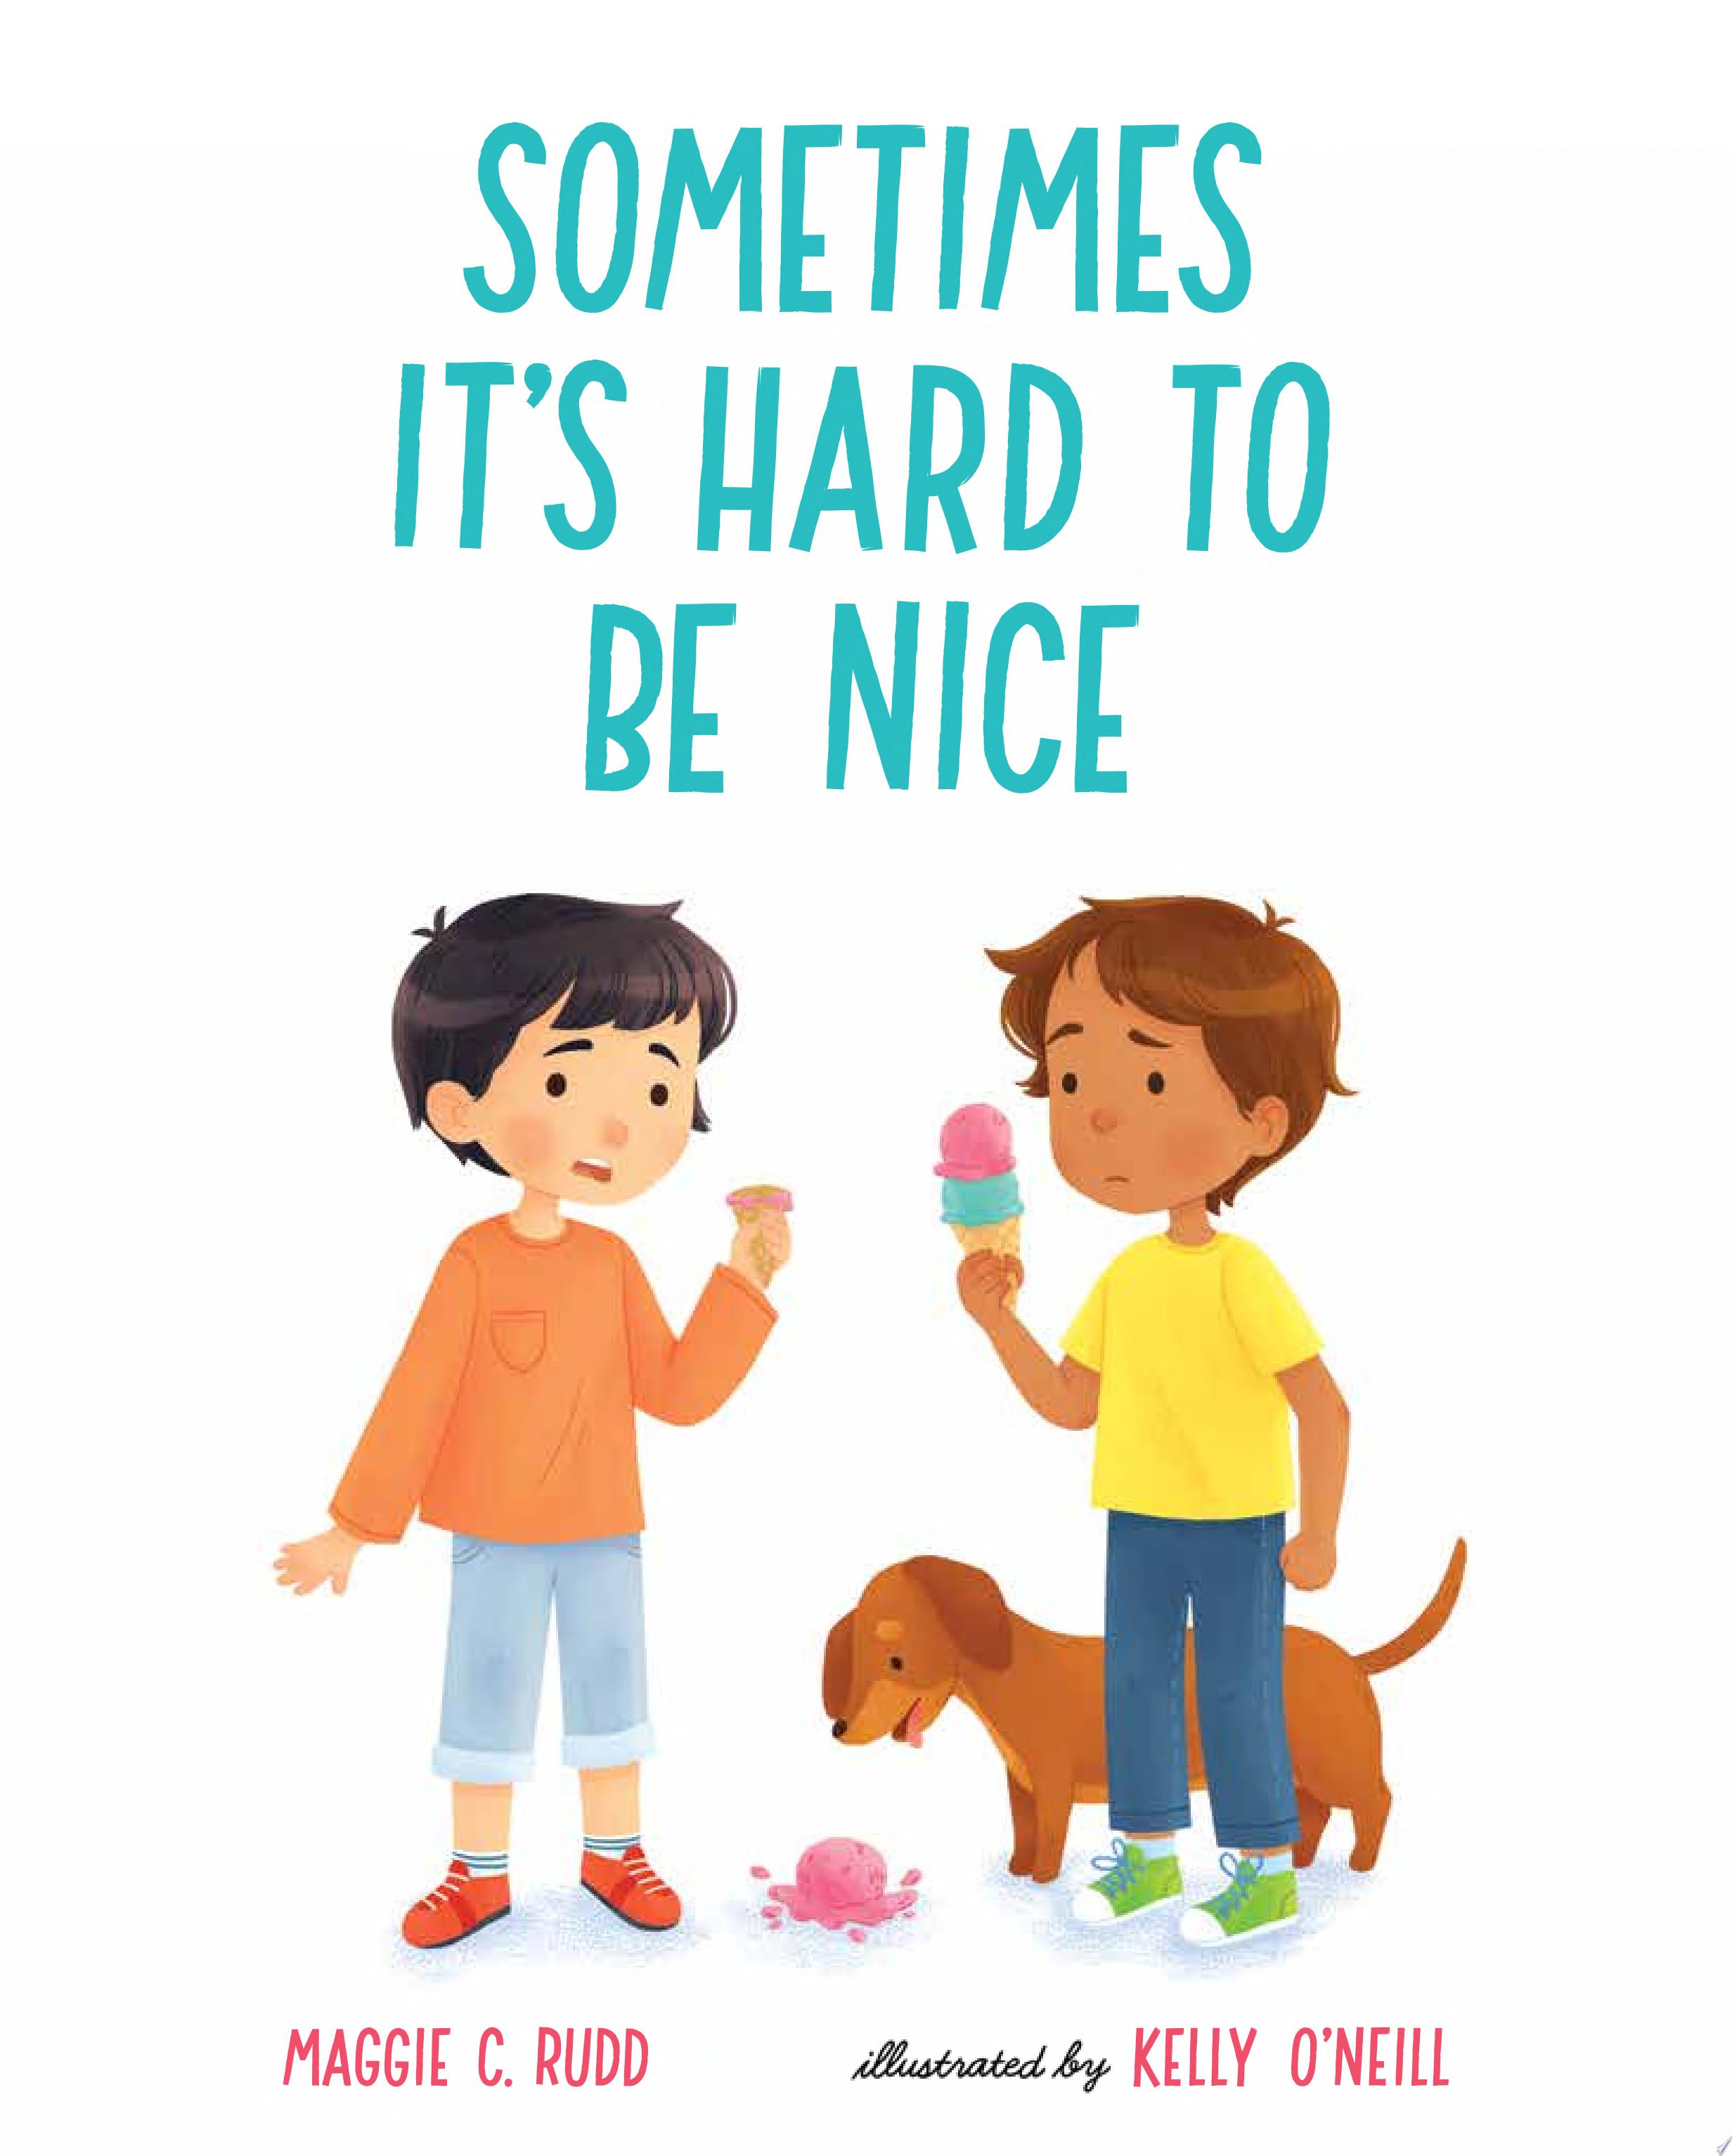 Image for "Sometimes It&#039;s Hard to Be Nice"